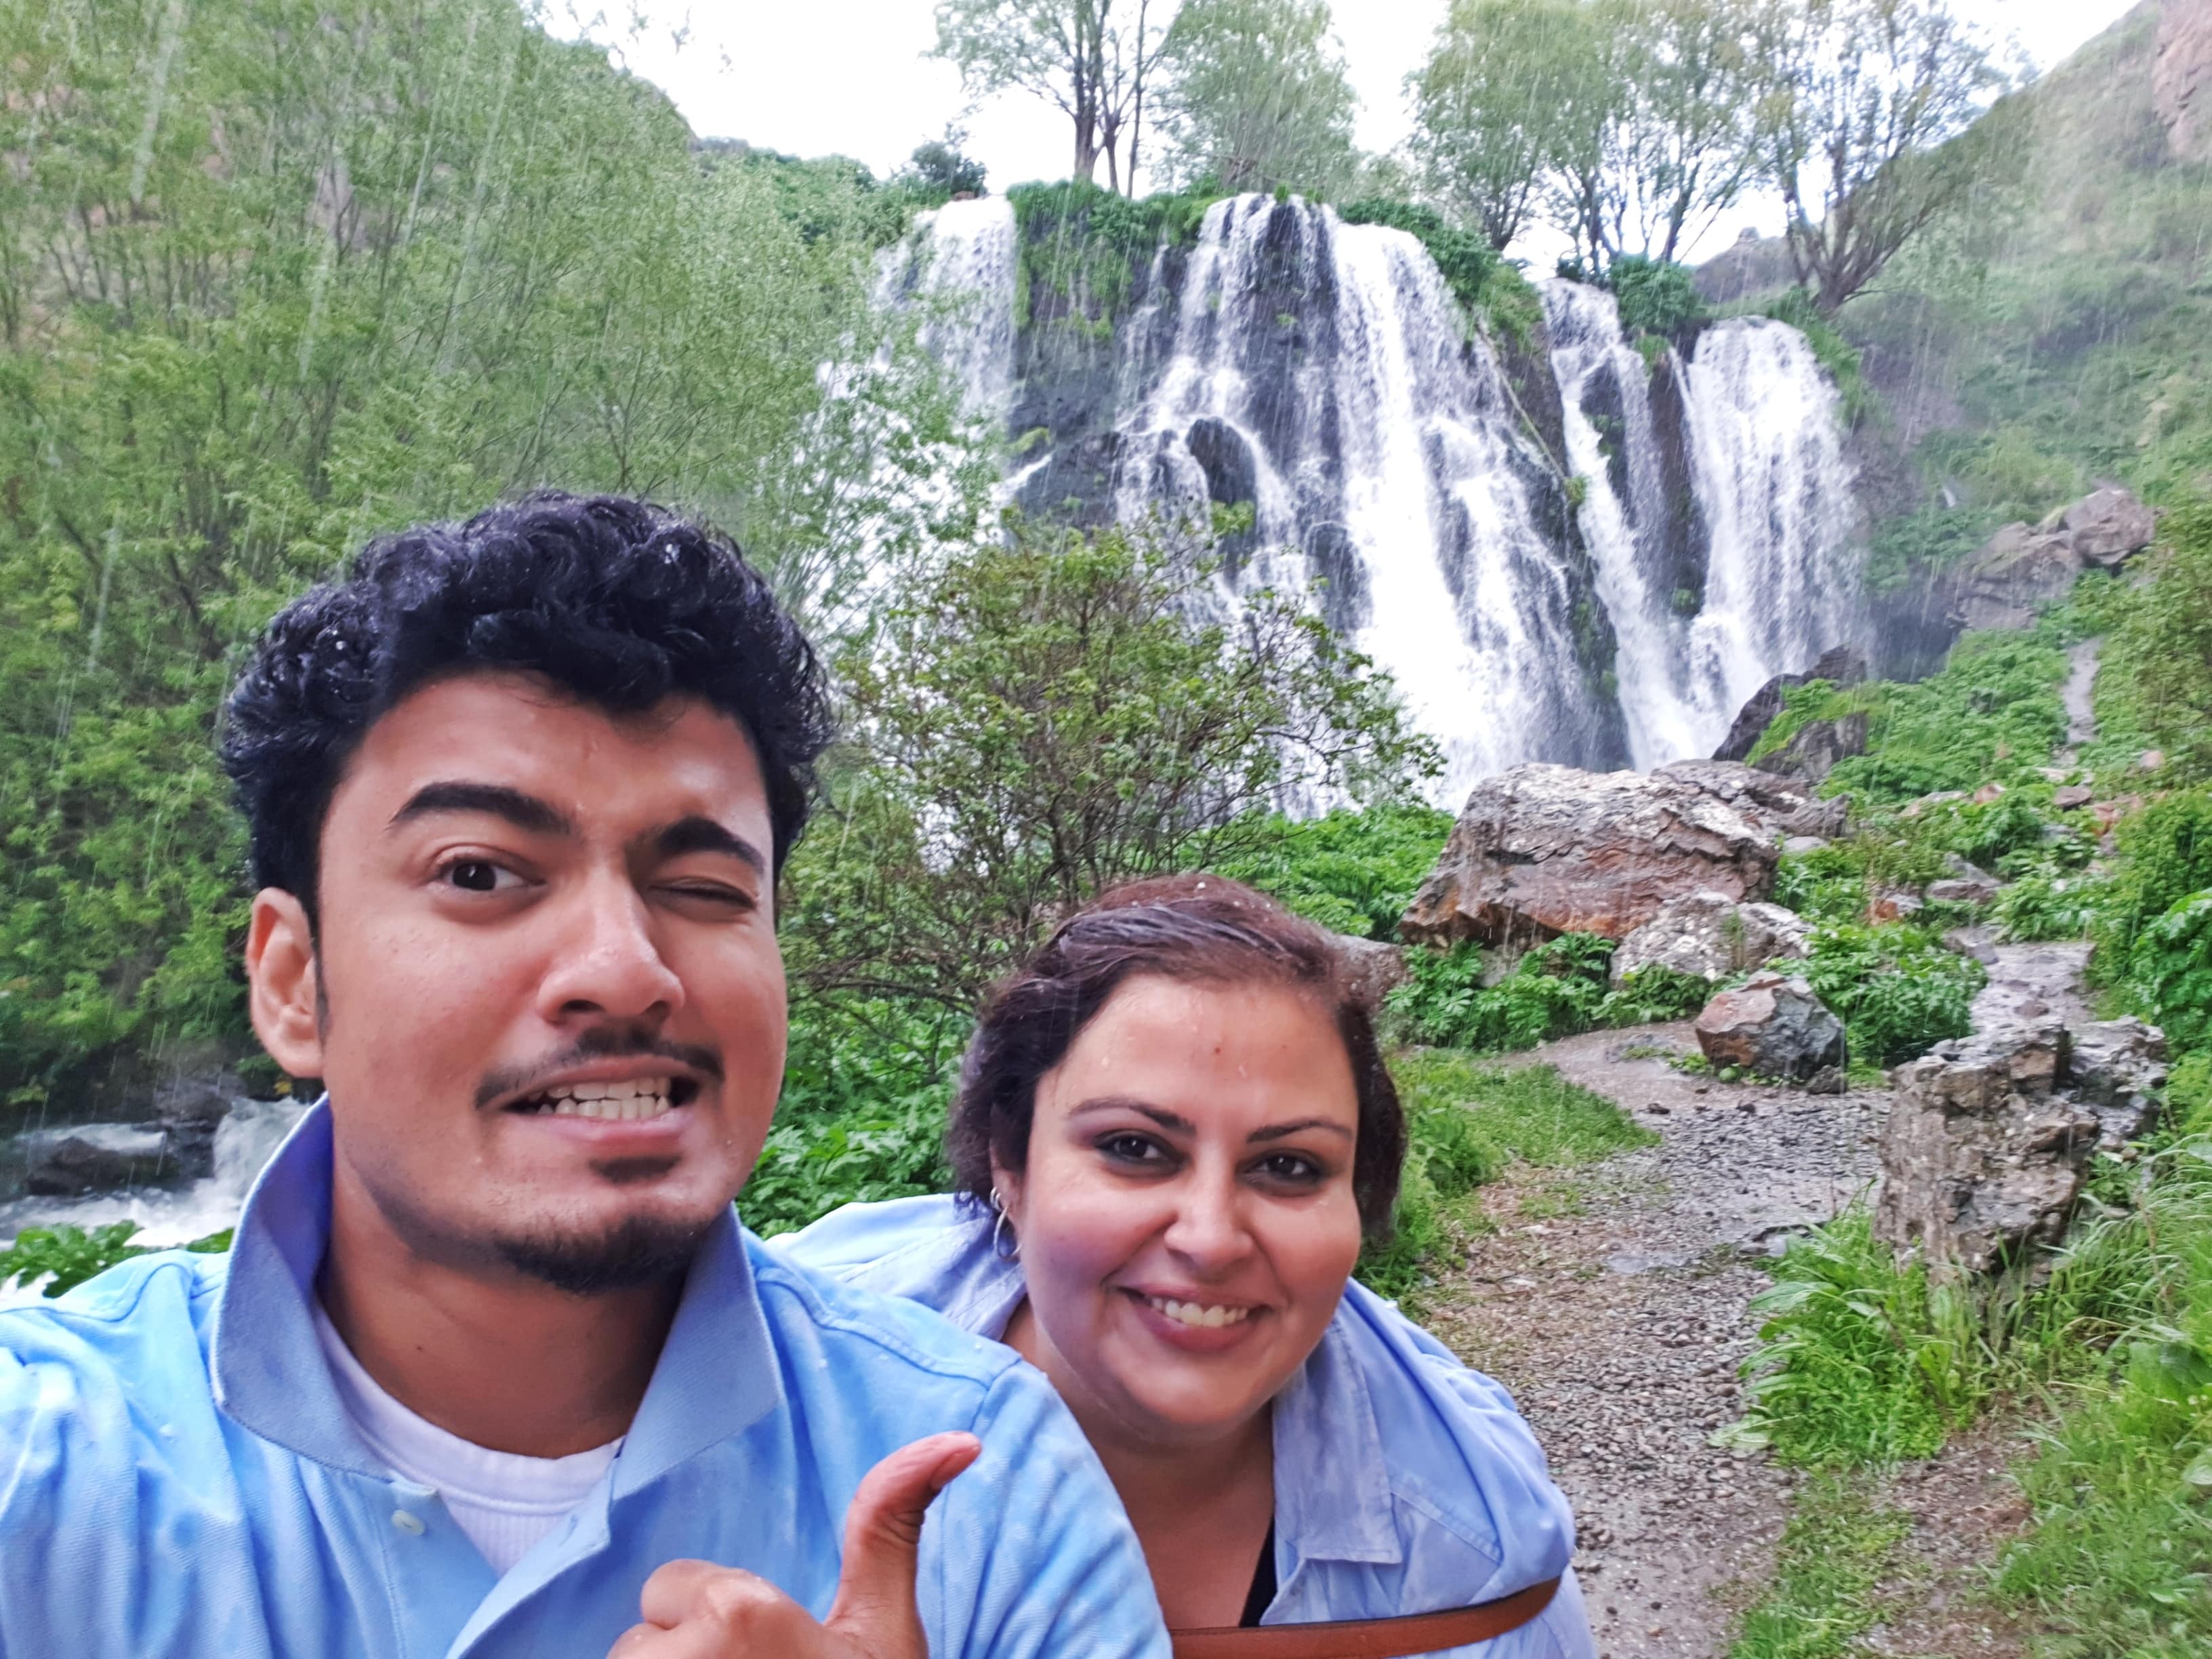 Selfie time with Ava at the Shaki waterfall just when it began raining